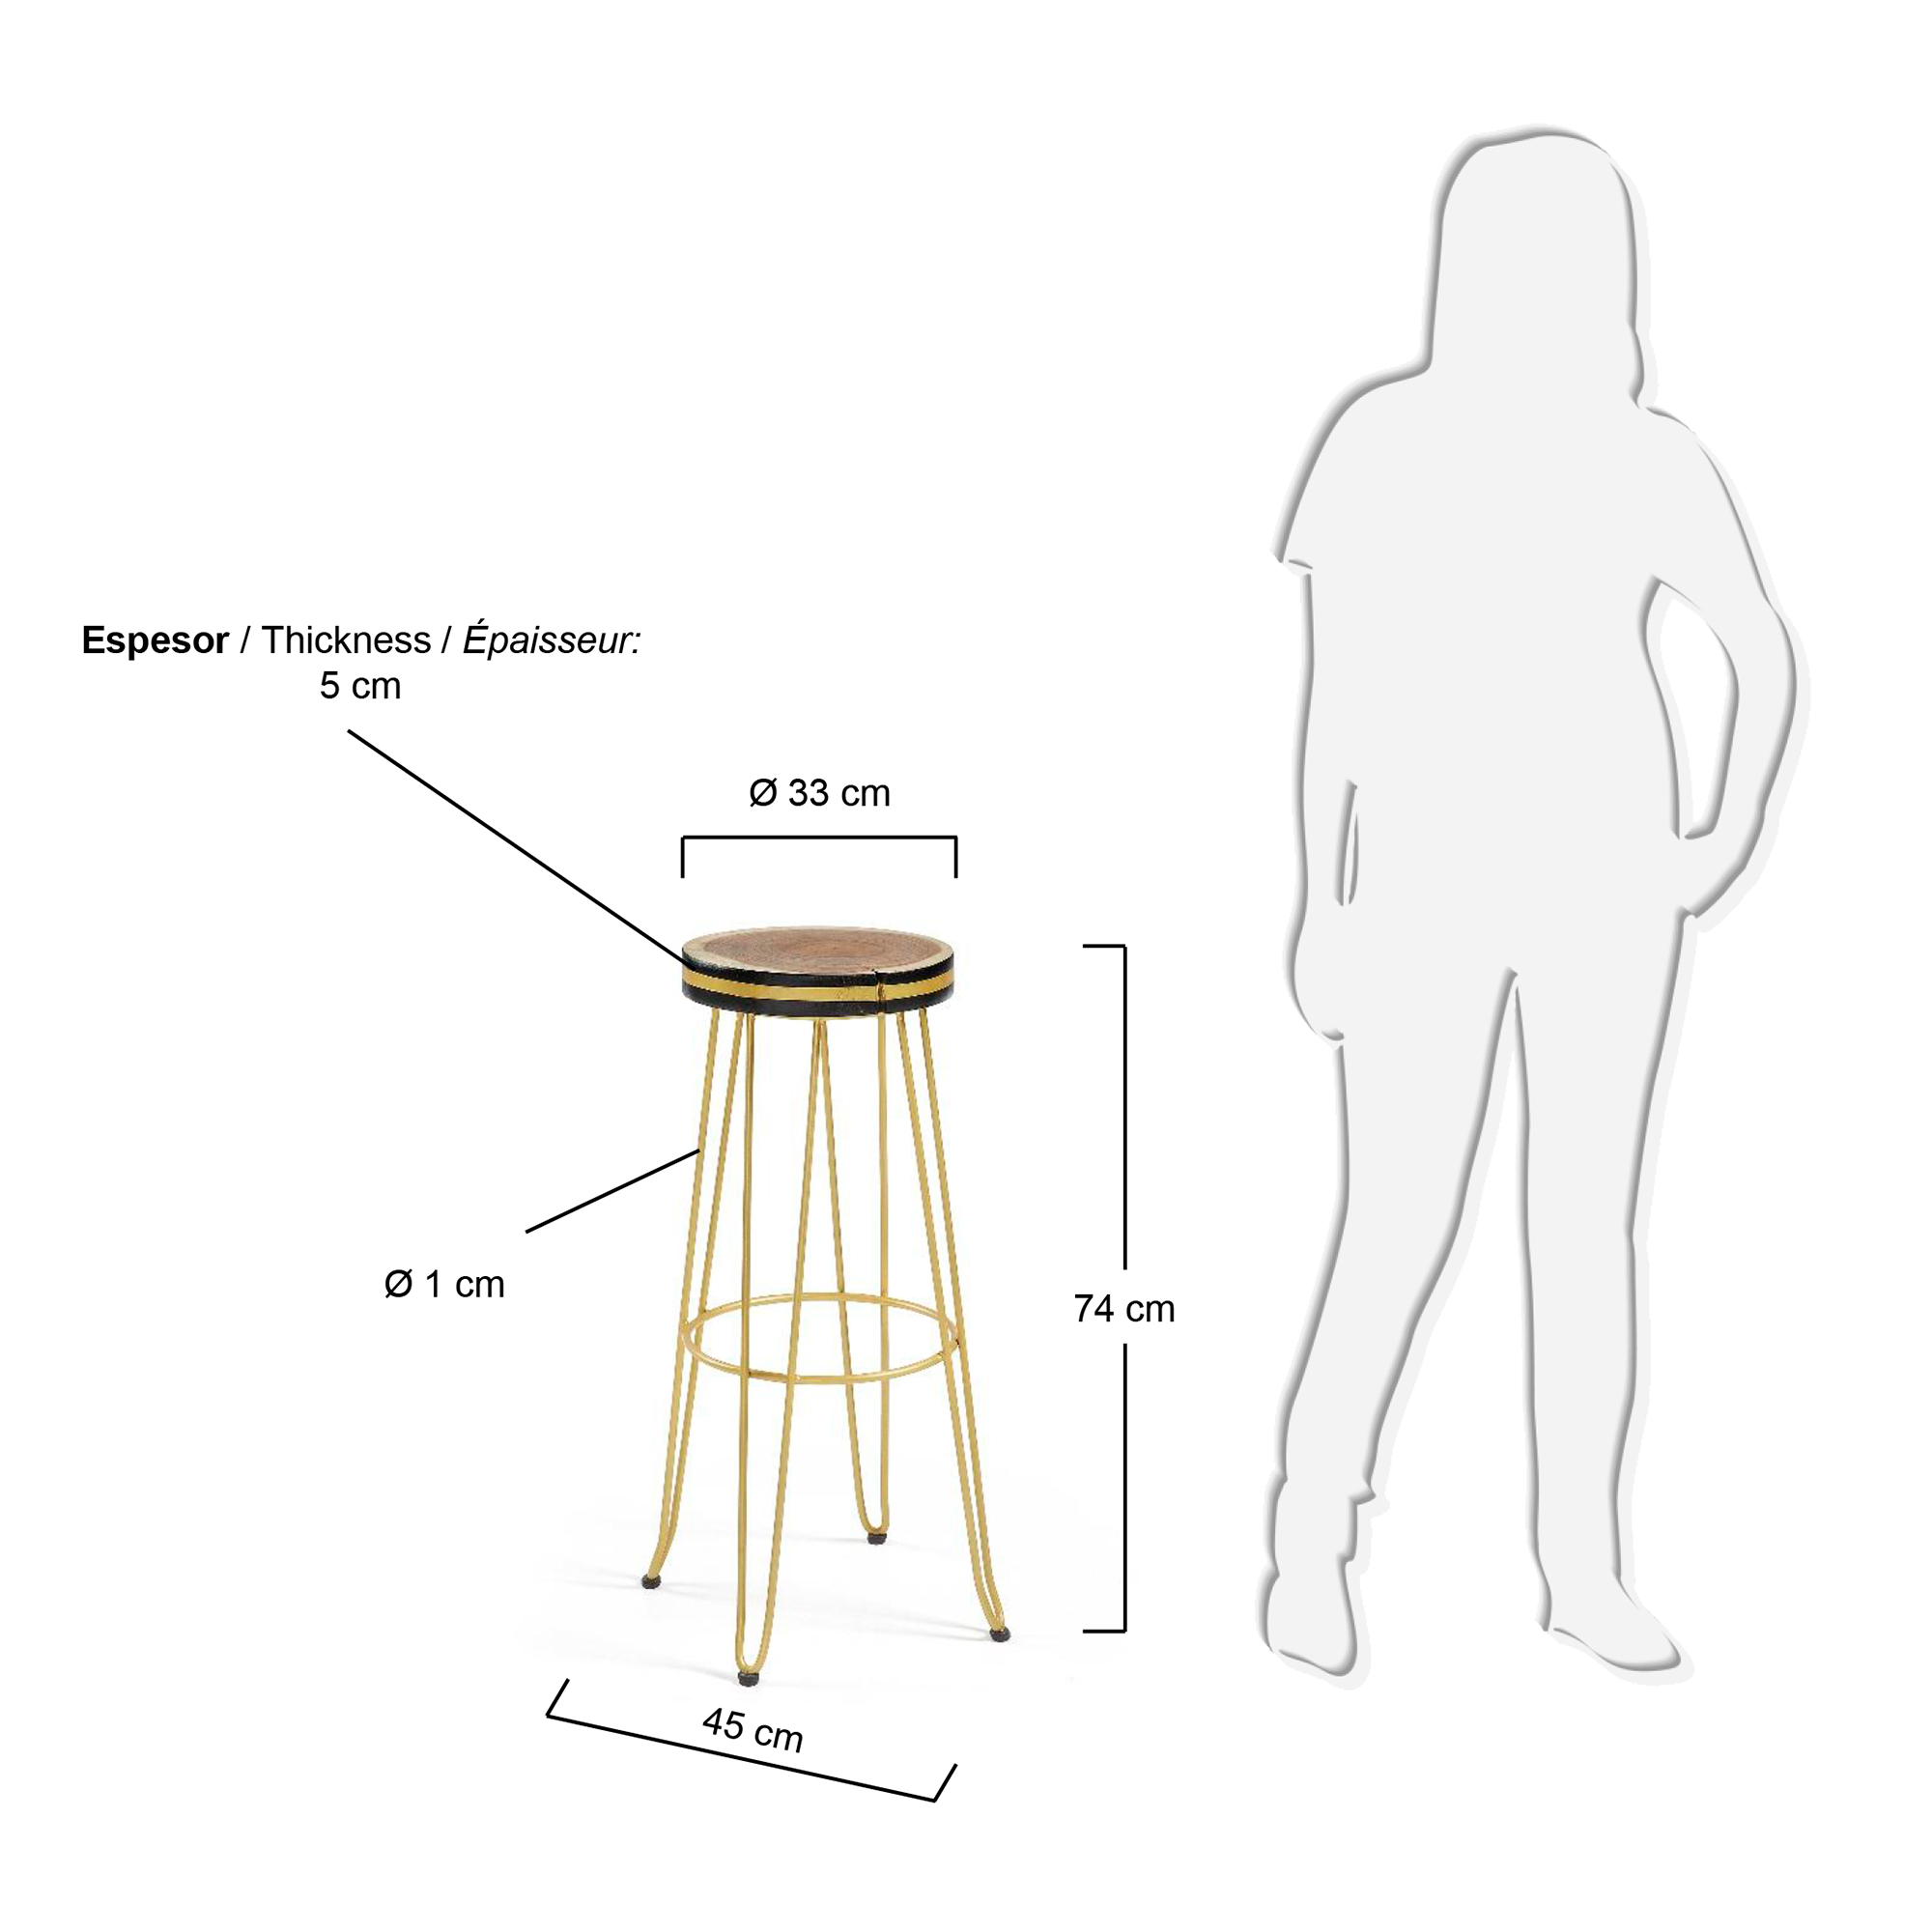 Faye solid mungur wood & steel stool with a gold finish, 74 cm height - sizes